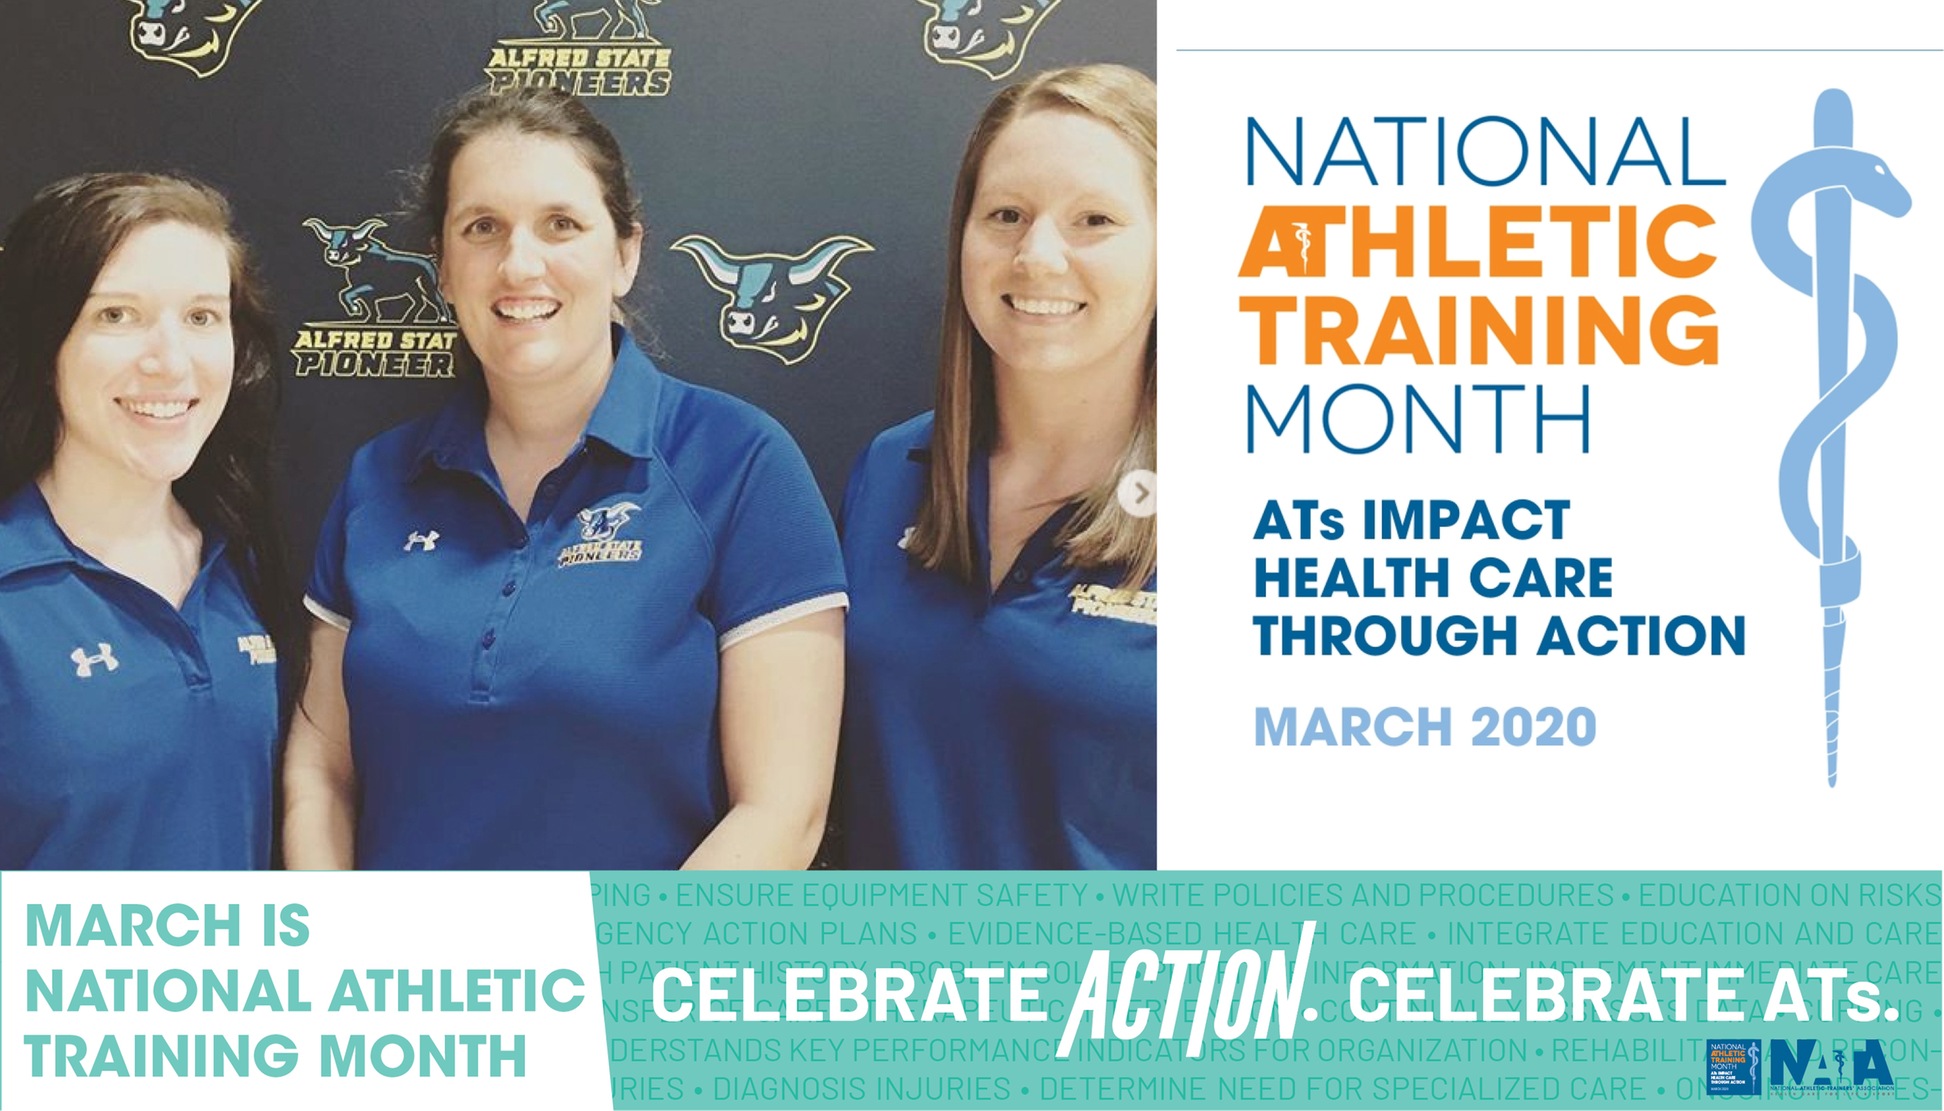 March is National Athletic Training Month - thanks to Kylie Bierman, Alexe Pask, and Becca Straub for their hard work for our student-athletes